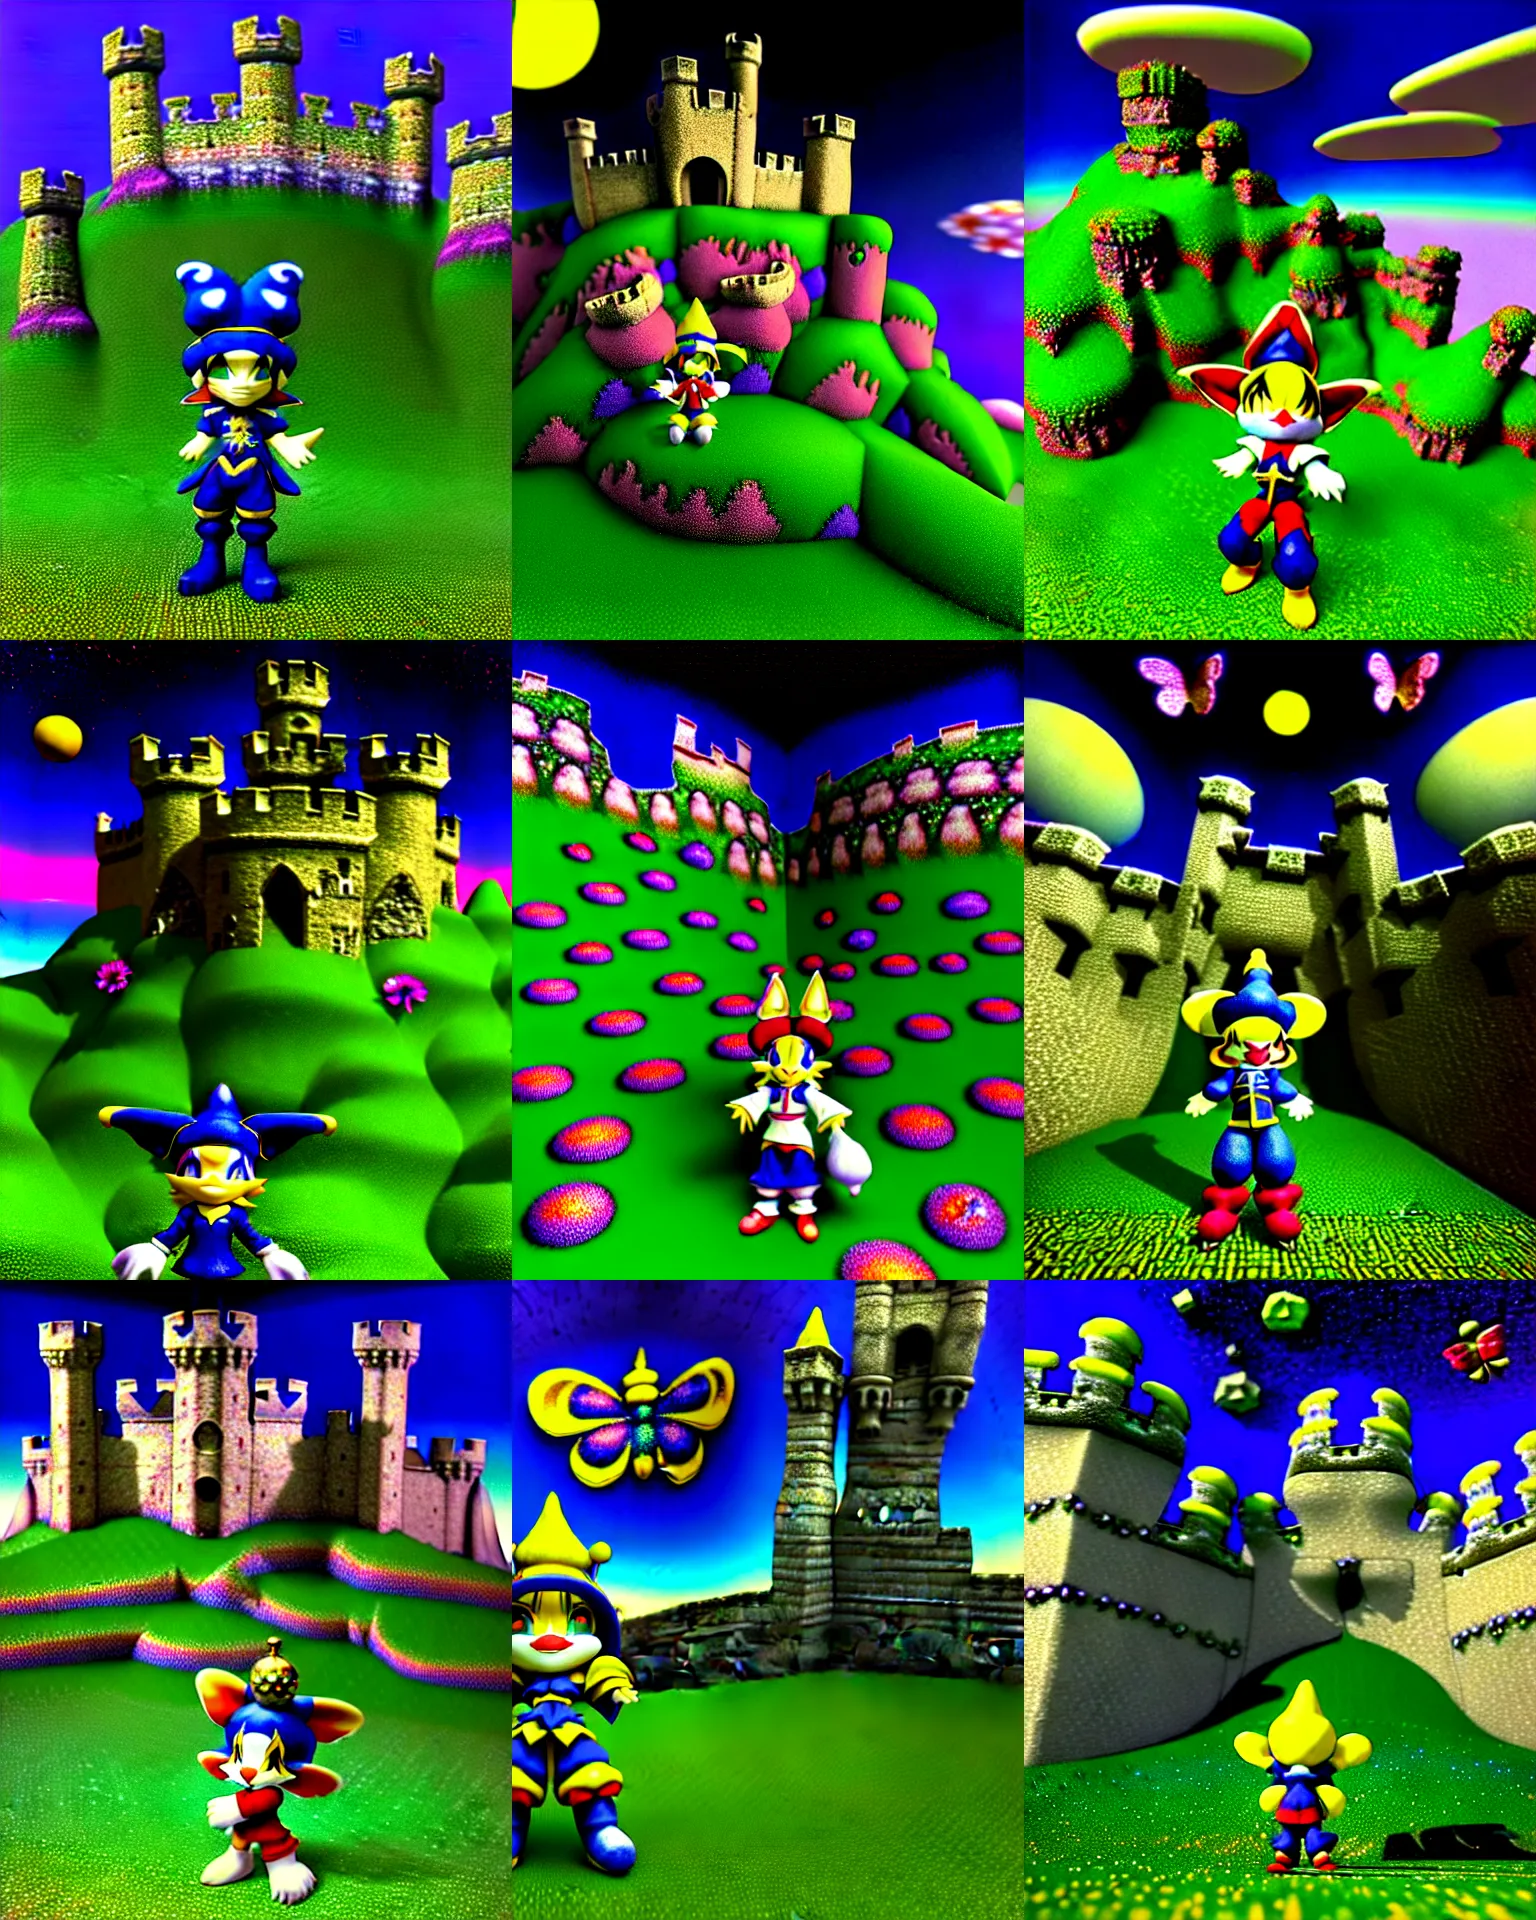 Prompt: 3 d render of chibi medieval jester klonoa standing in raytraced mountain landscape with castle ruins against a psychedelic surreal background with 3 d butterflies and 3 d flowers n the style of 1 9 9 0's cg graphics against the cloudy night sky, lsd dream emulator psx, 3 d rendered y 2 k aesthetic by ichiro tanida, 3 do magazine, wide shot